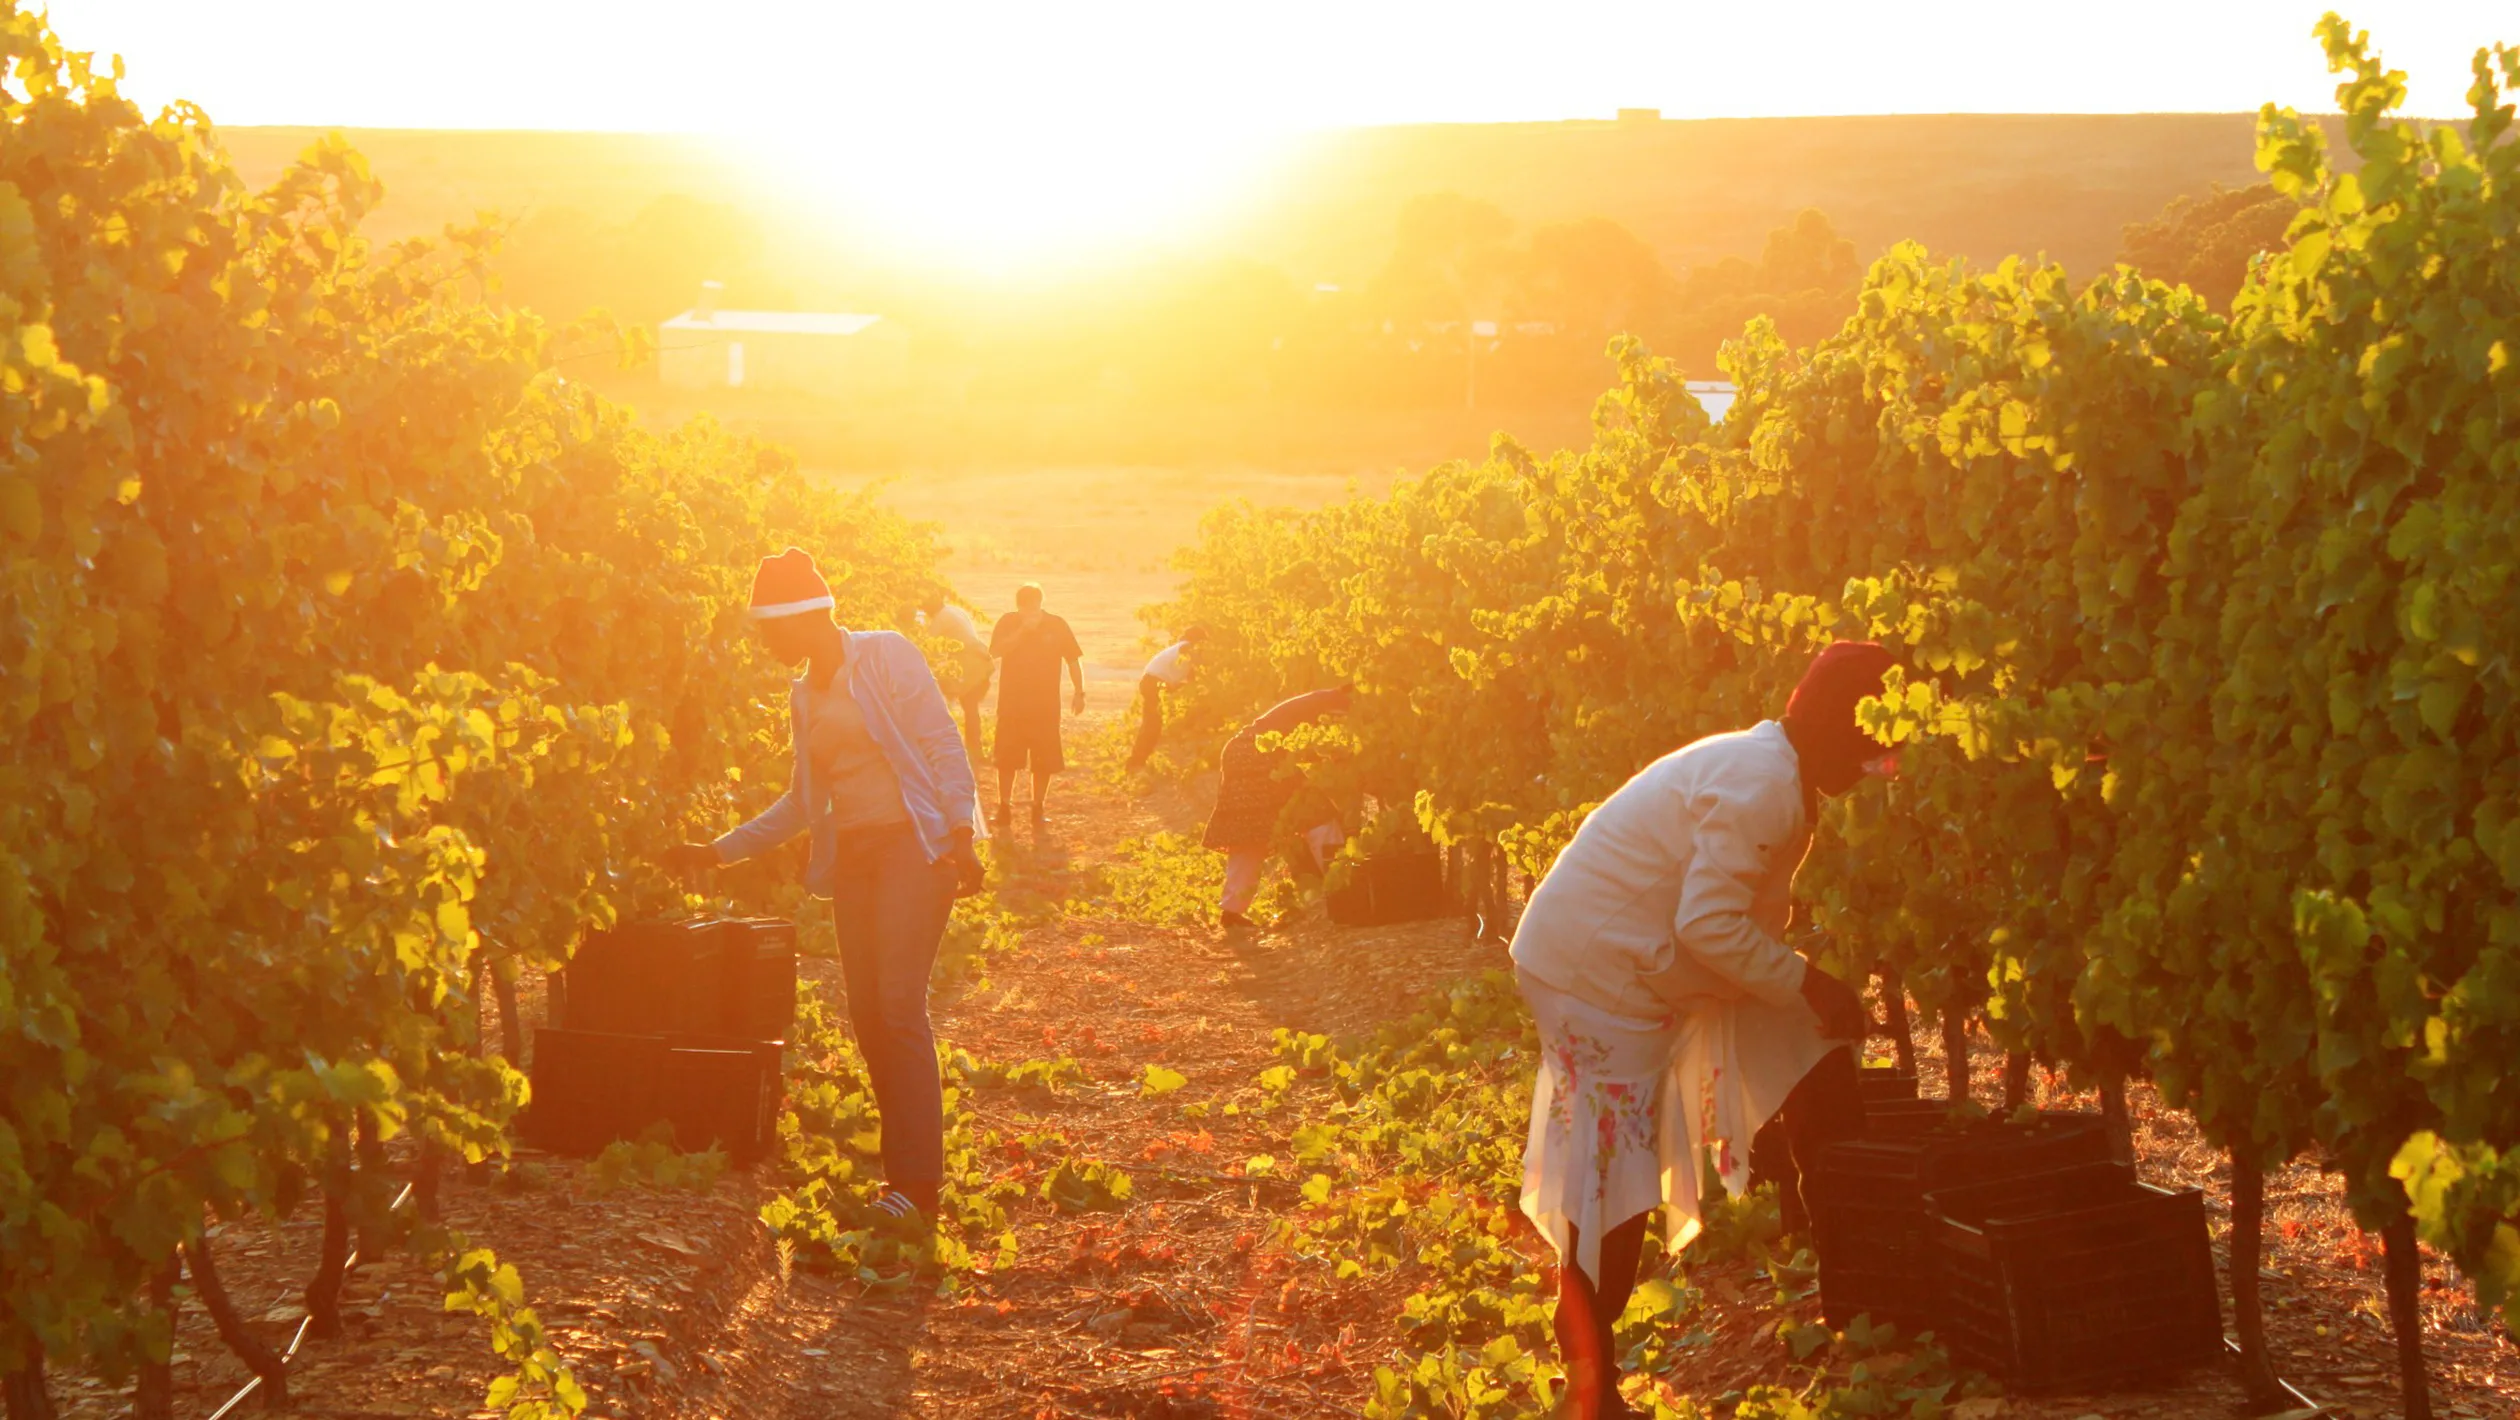 Workers pick grapes in a vineyard as the sun sets